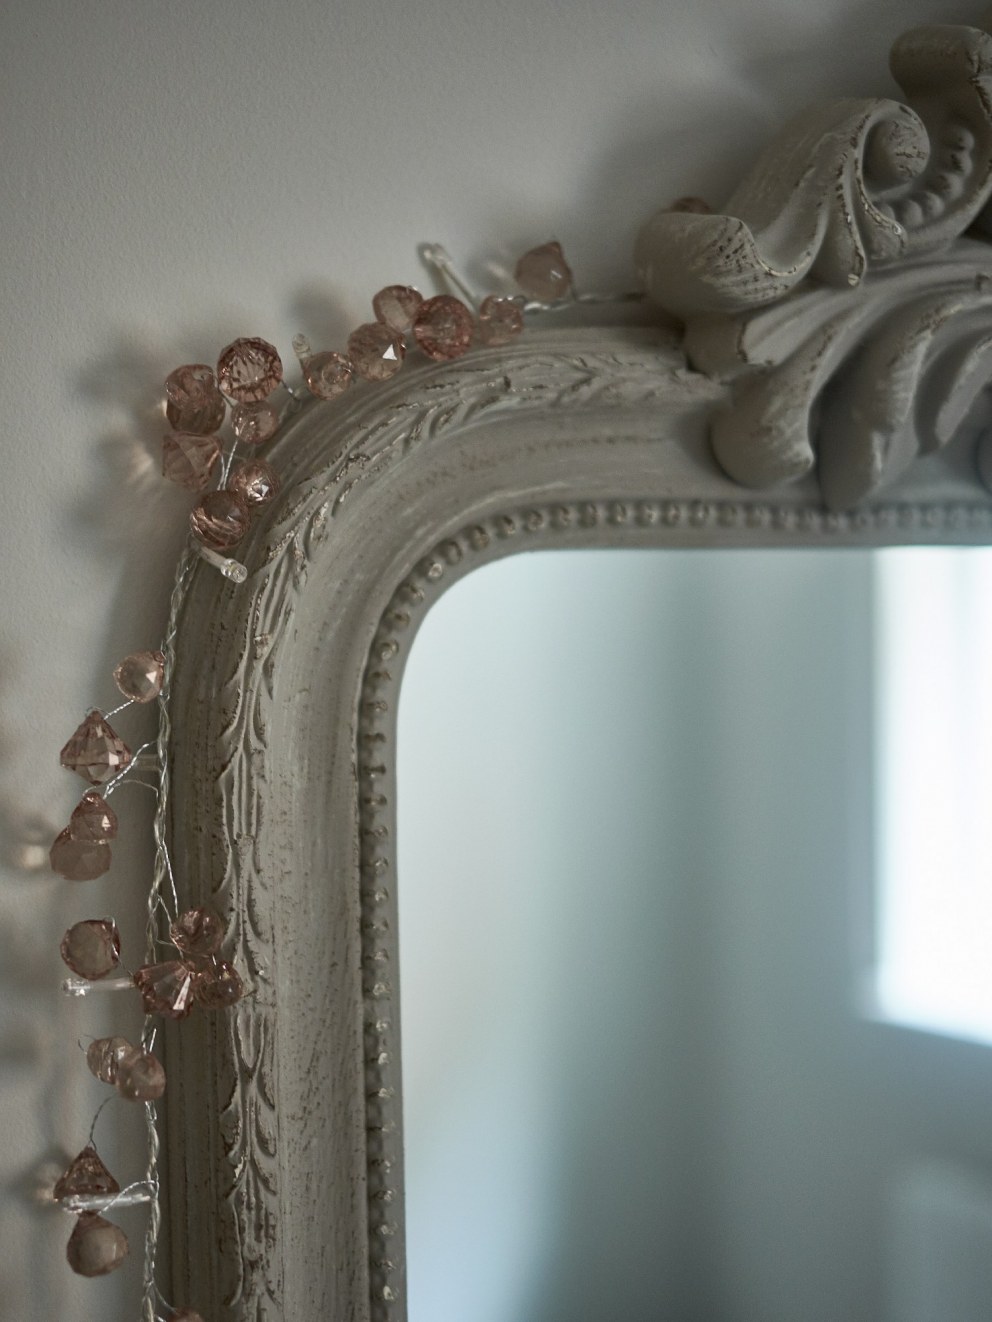 Apartment in the city  | Detail of girls bedroom featuring some French styling and blush pink tones | Interior Designers